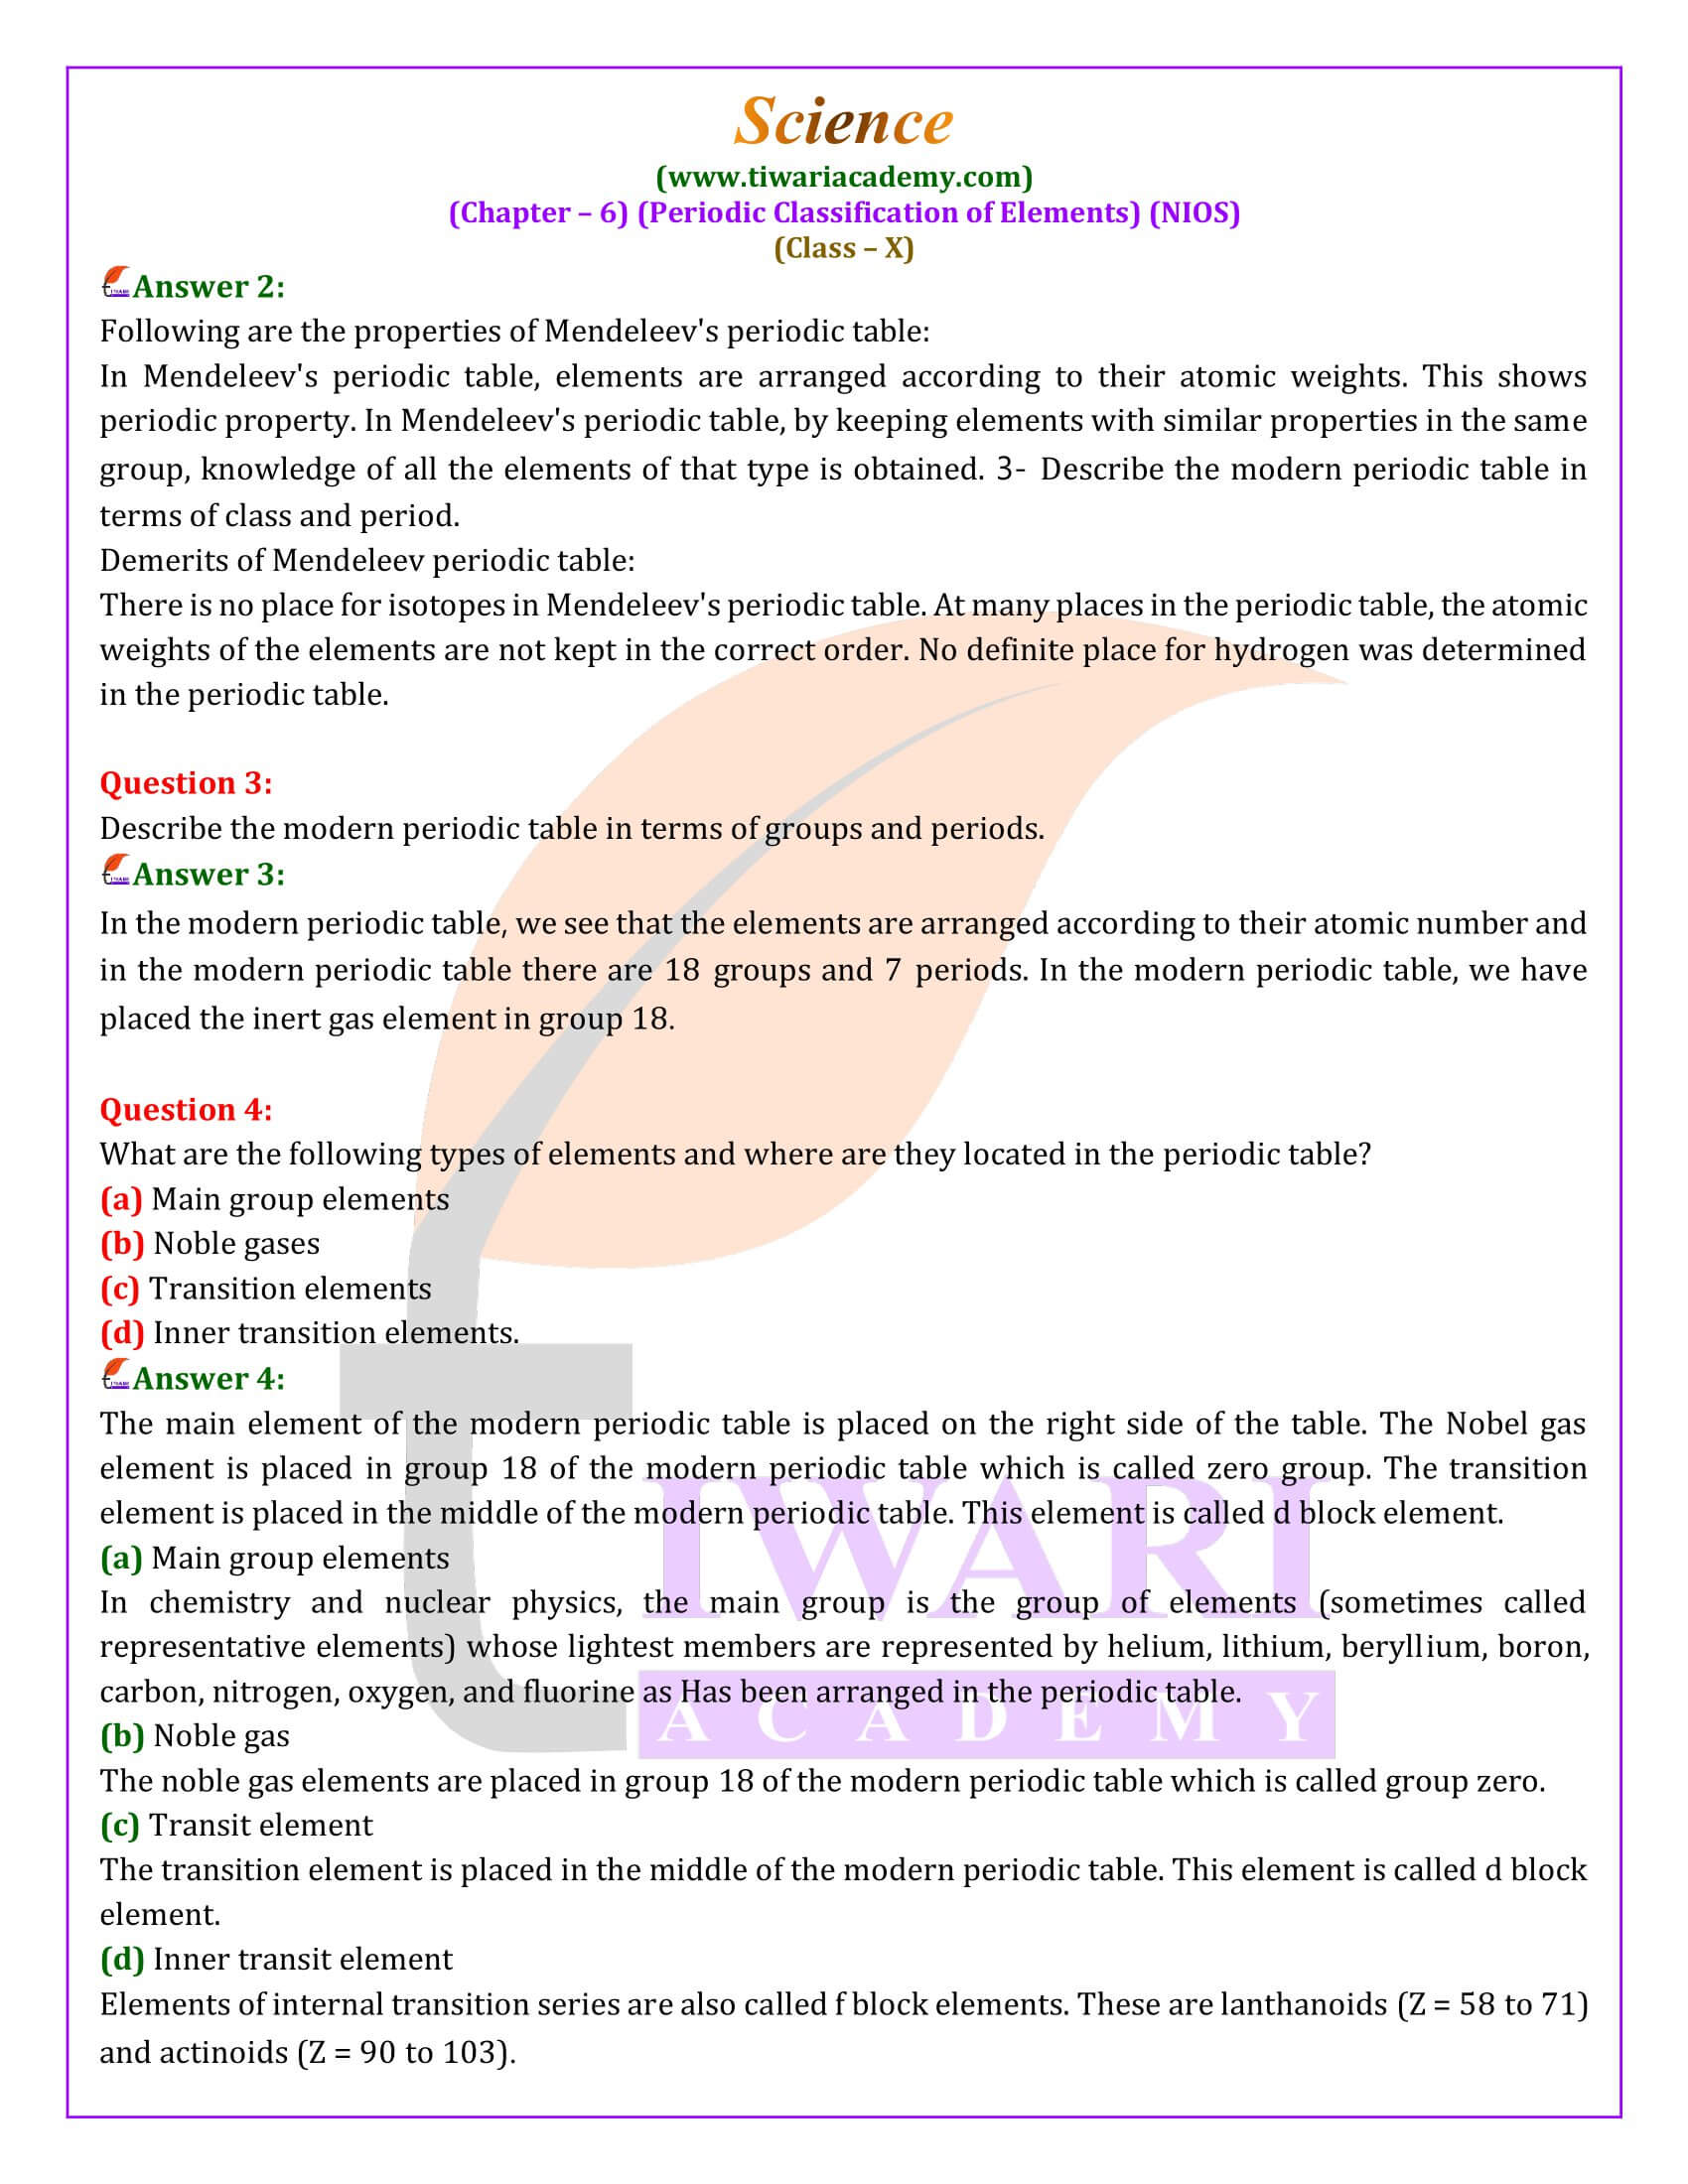 NIOS Class 10 Science Chapter 6 Periodic Classification of Elements HIndi and English Medium